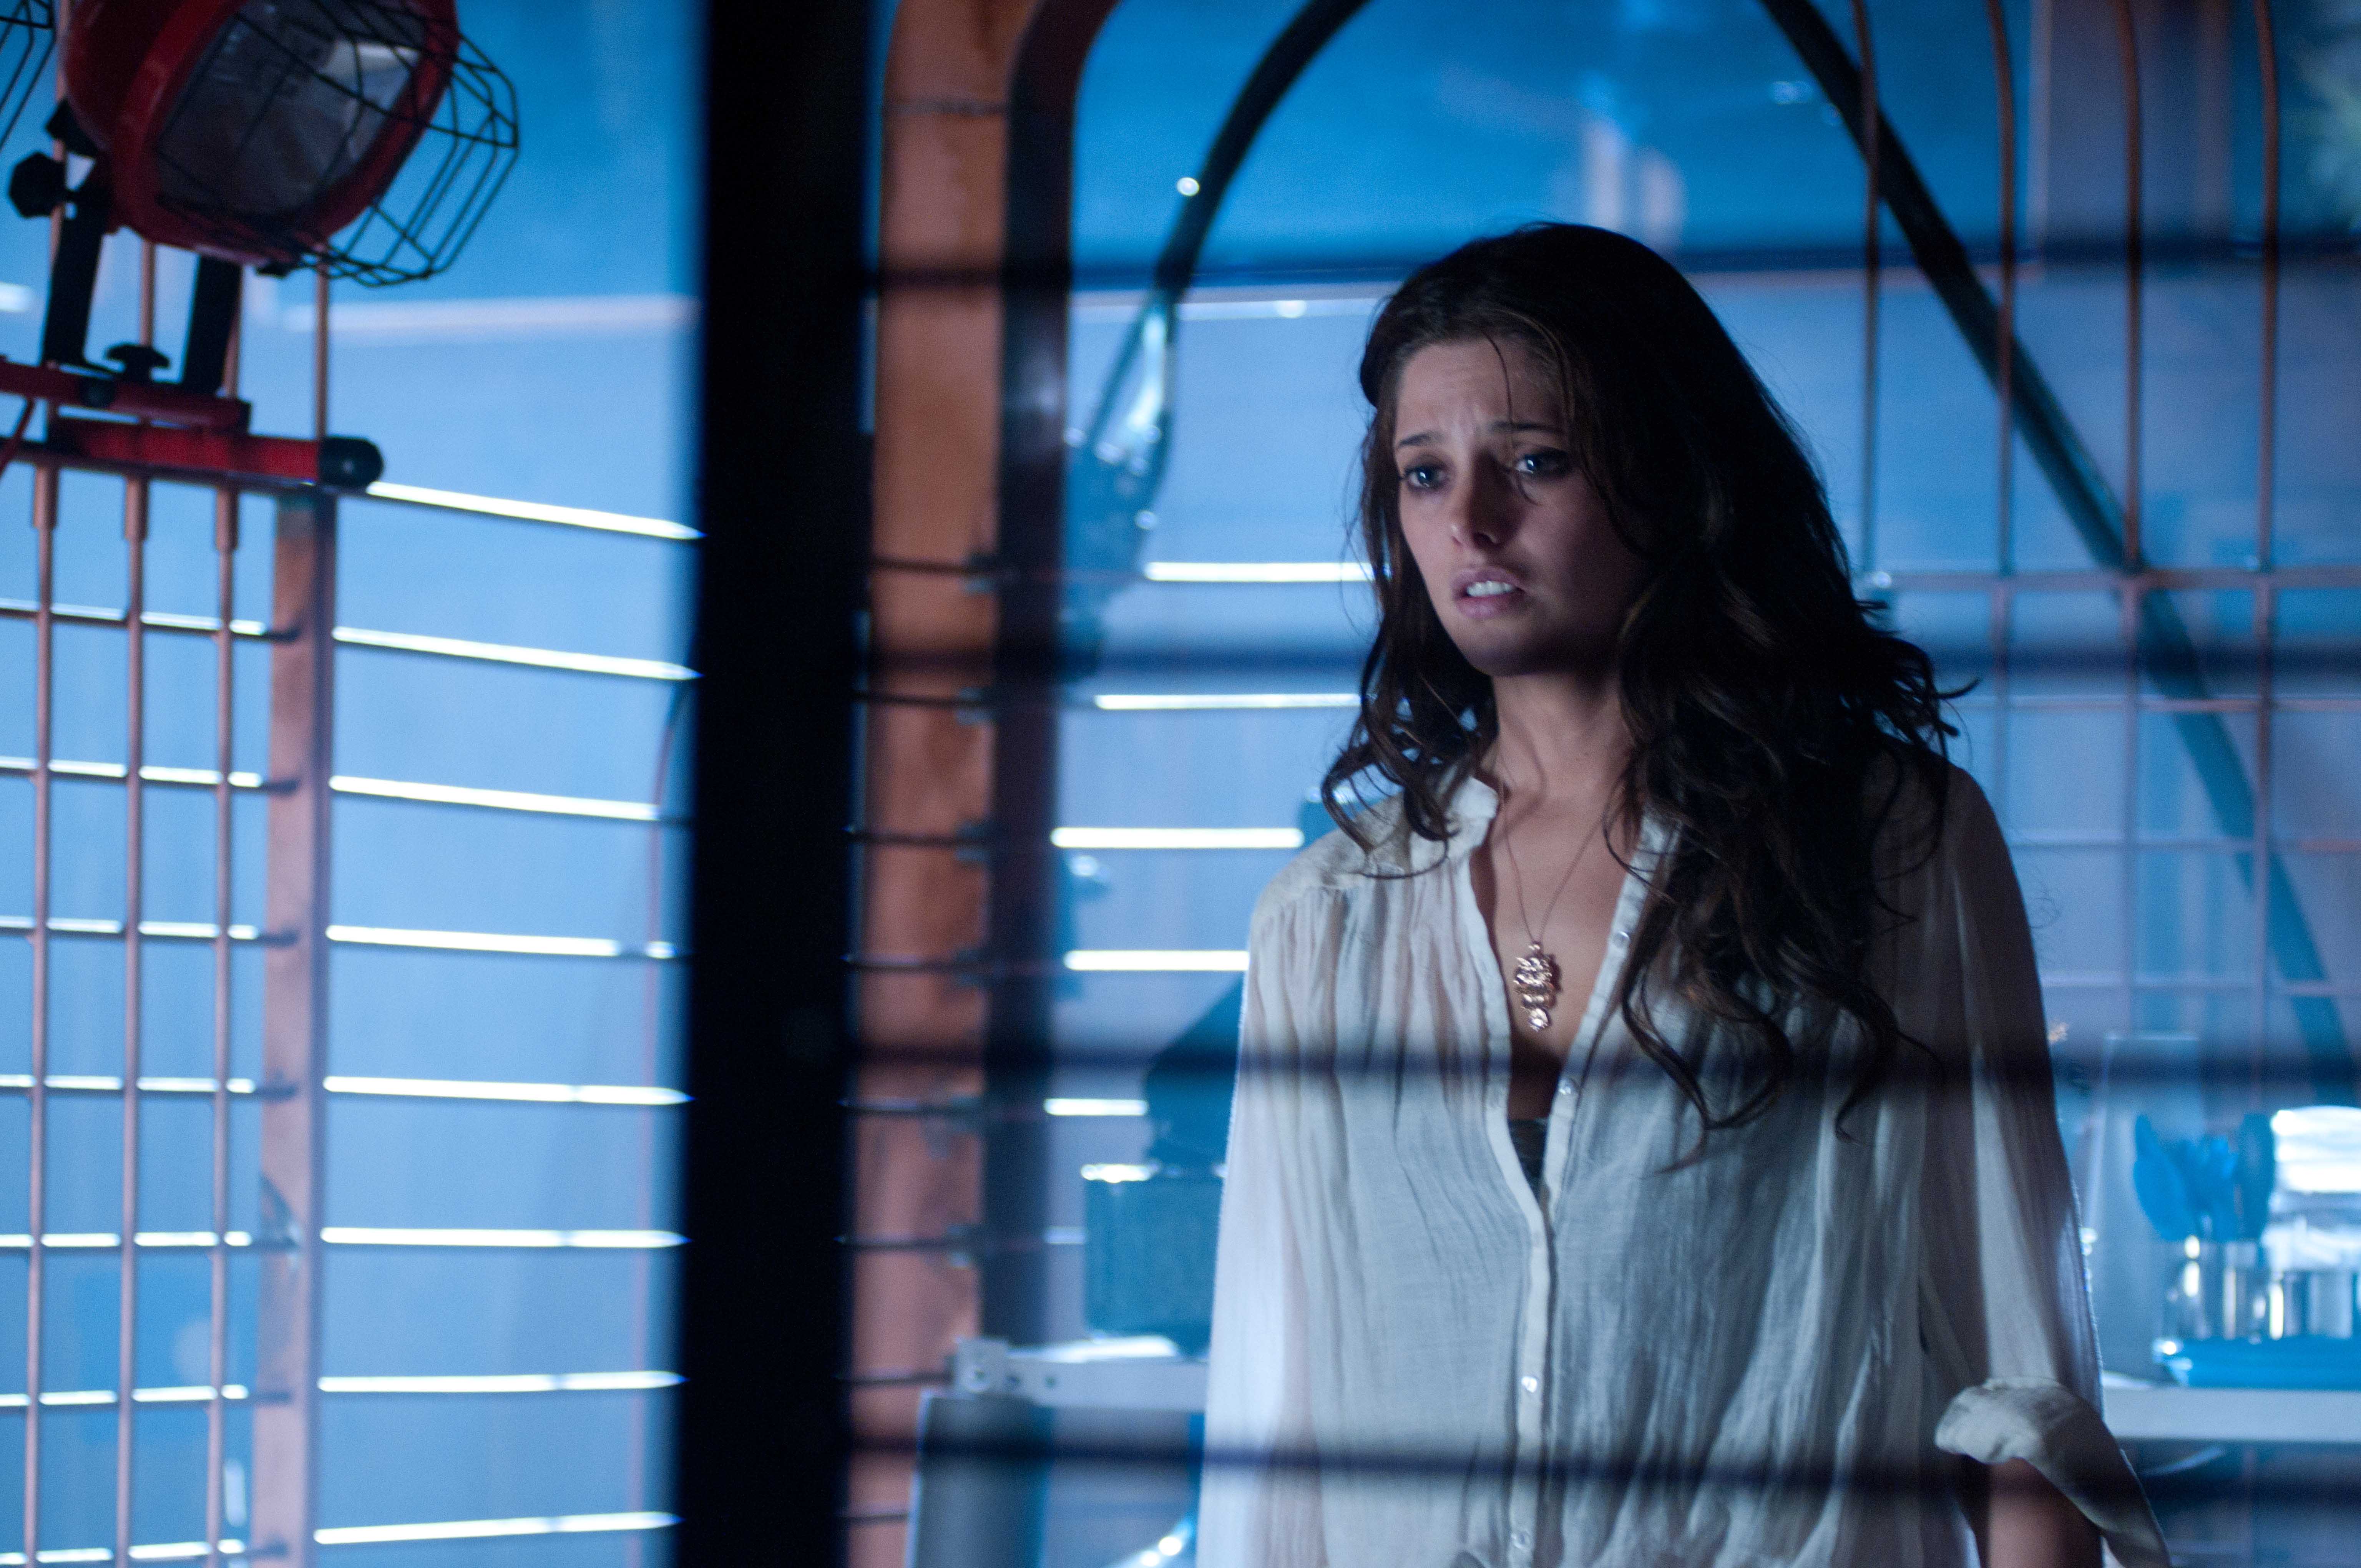  Ashley Greene as Kelly in Dark Castle Entertainment’s supernatural thriller The Apparition, a Warner Bros. Pictures release.